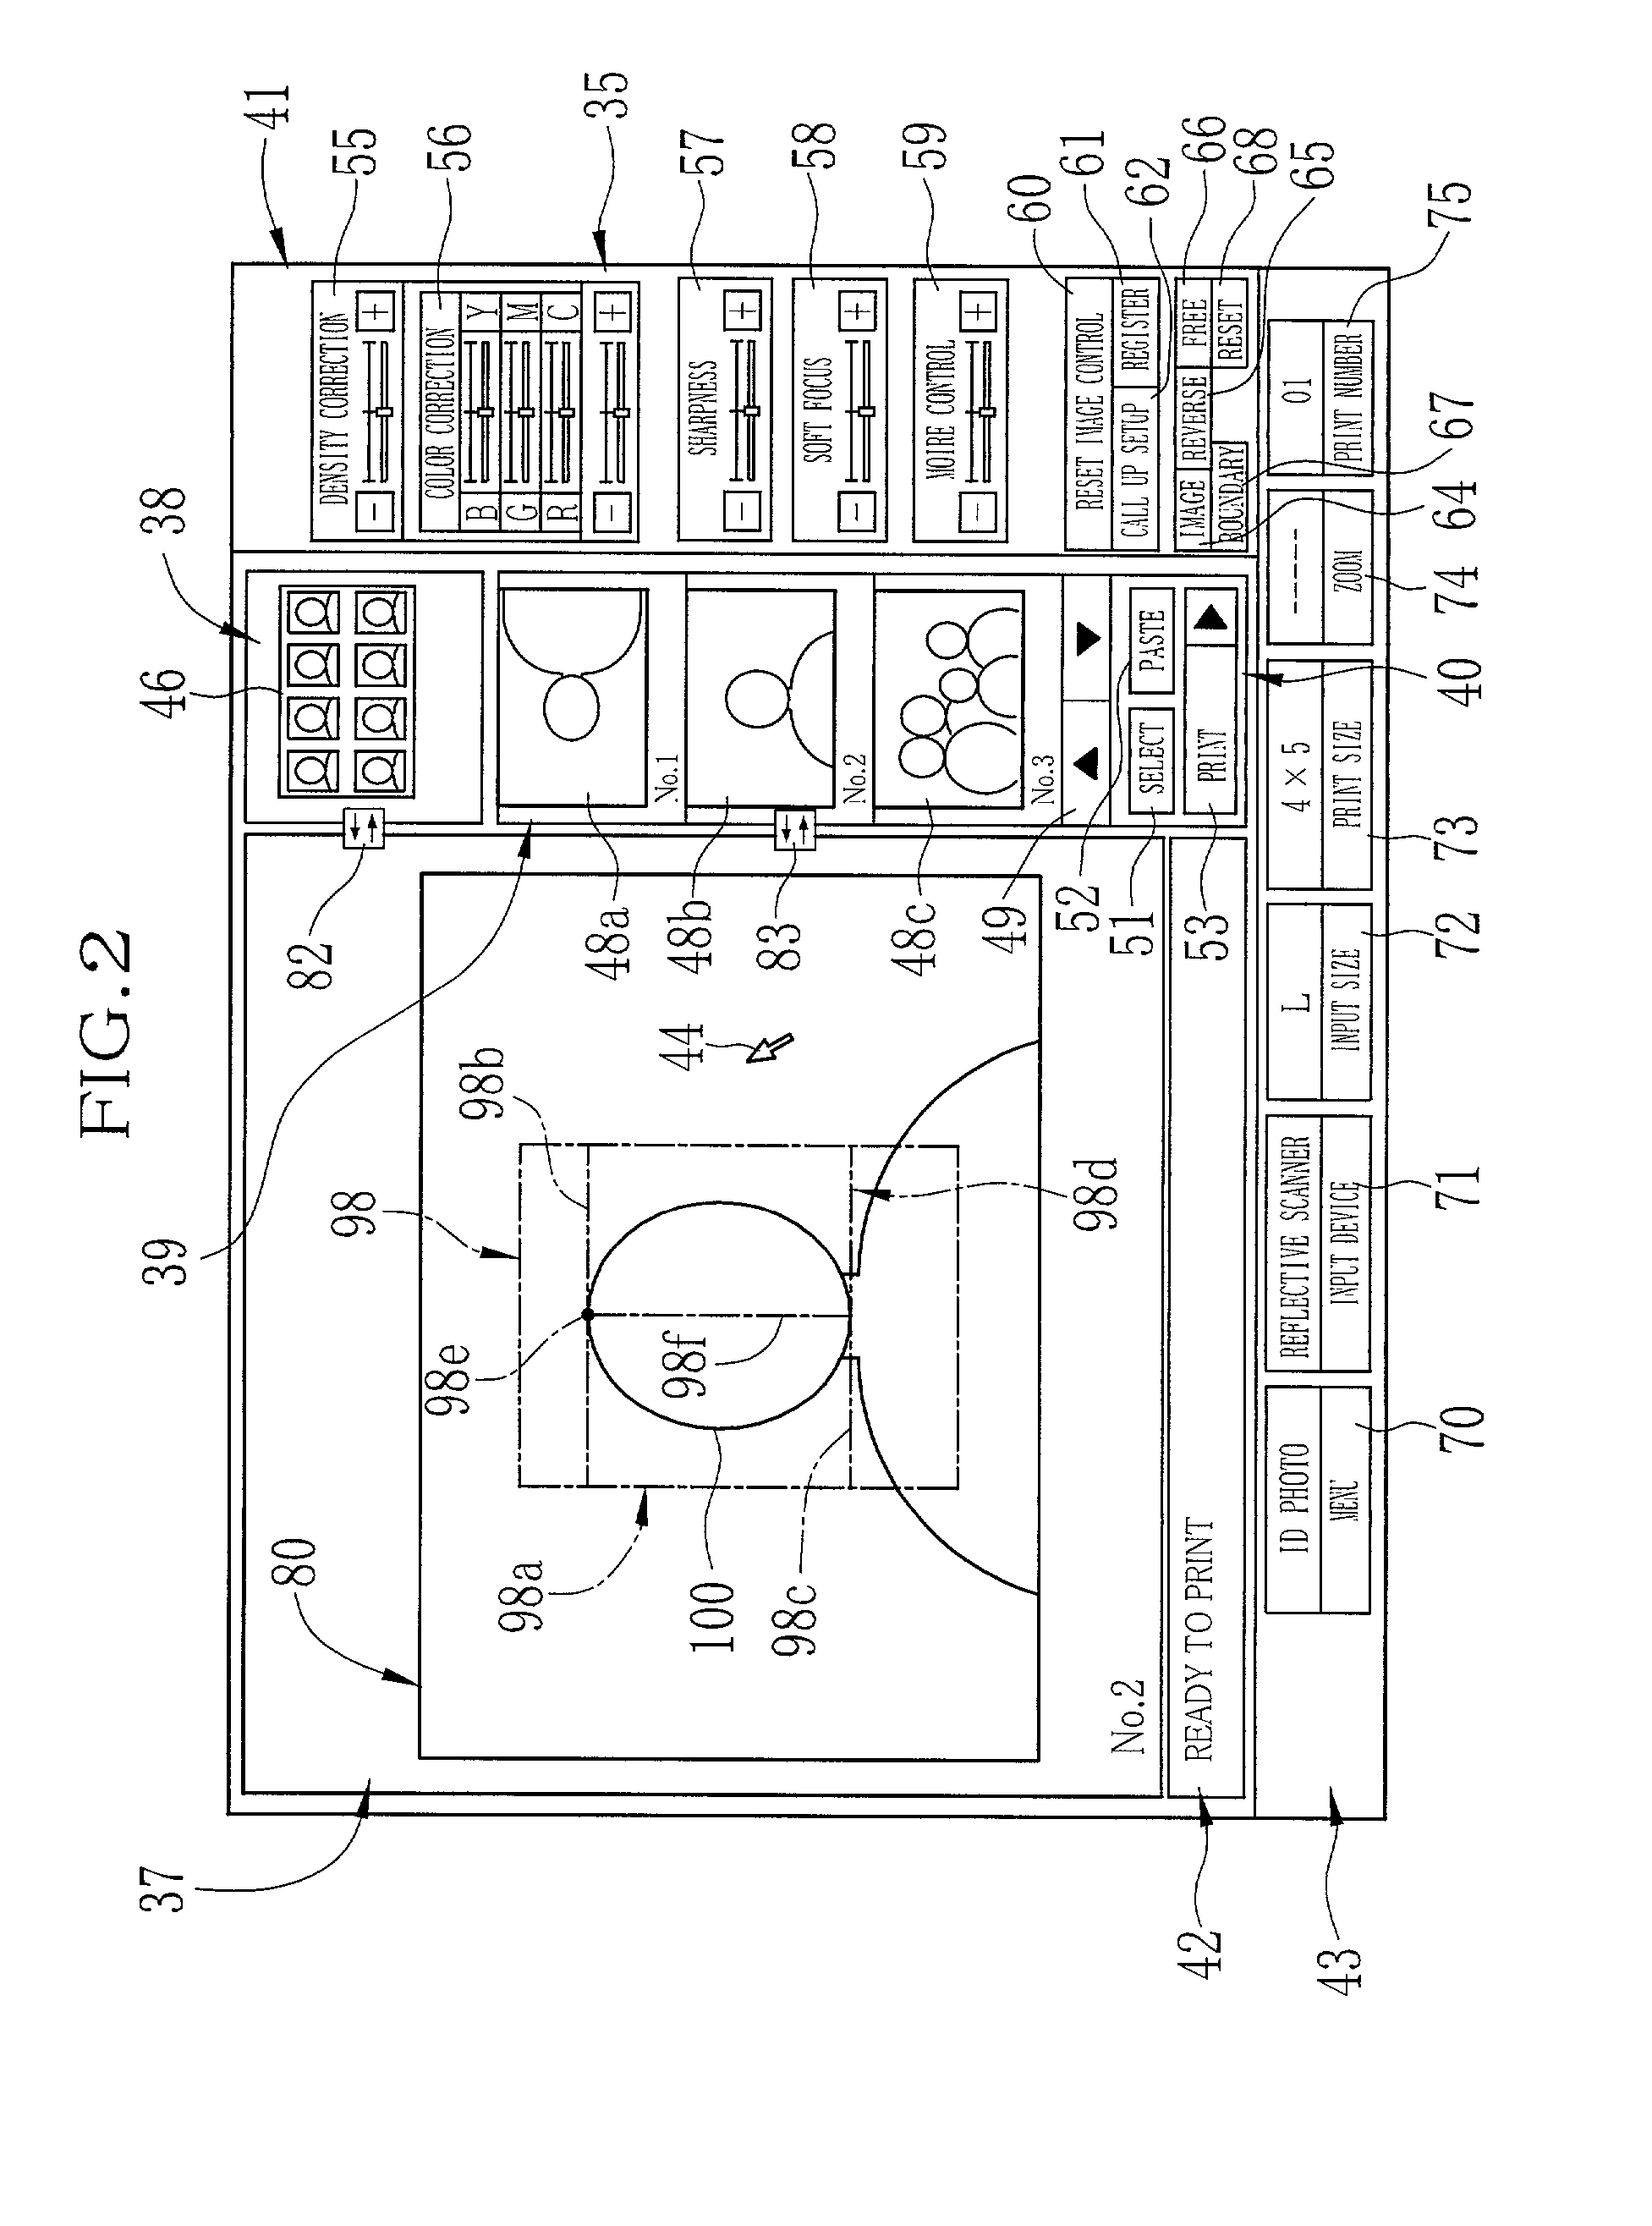 Image croppin and synthesizing method, and imaging apparatus